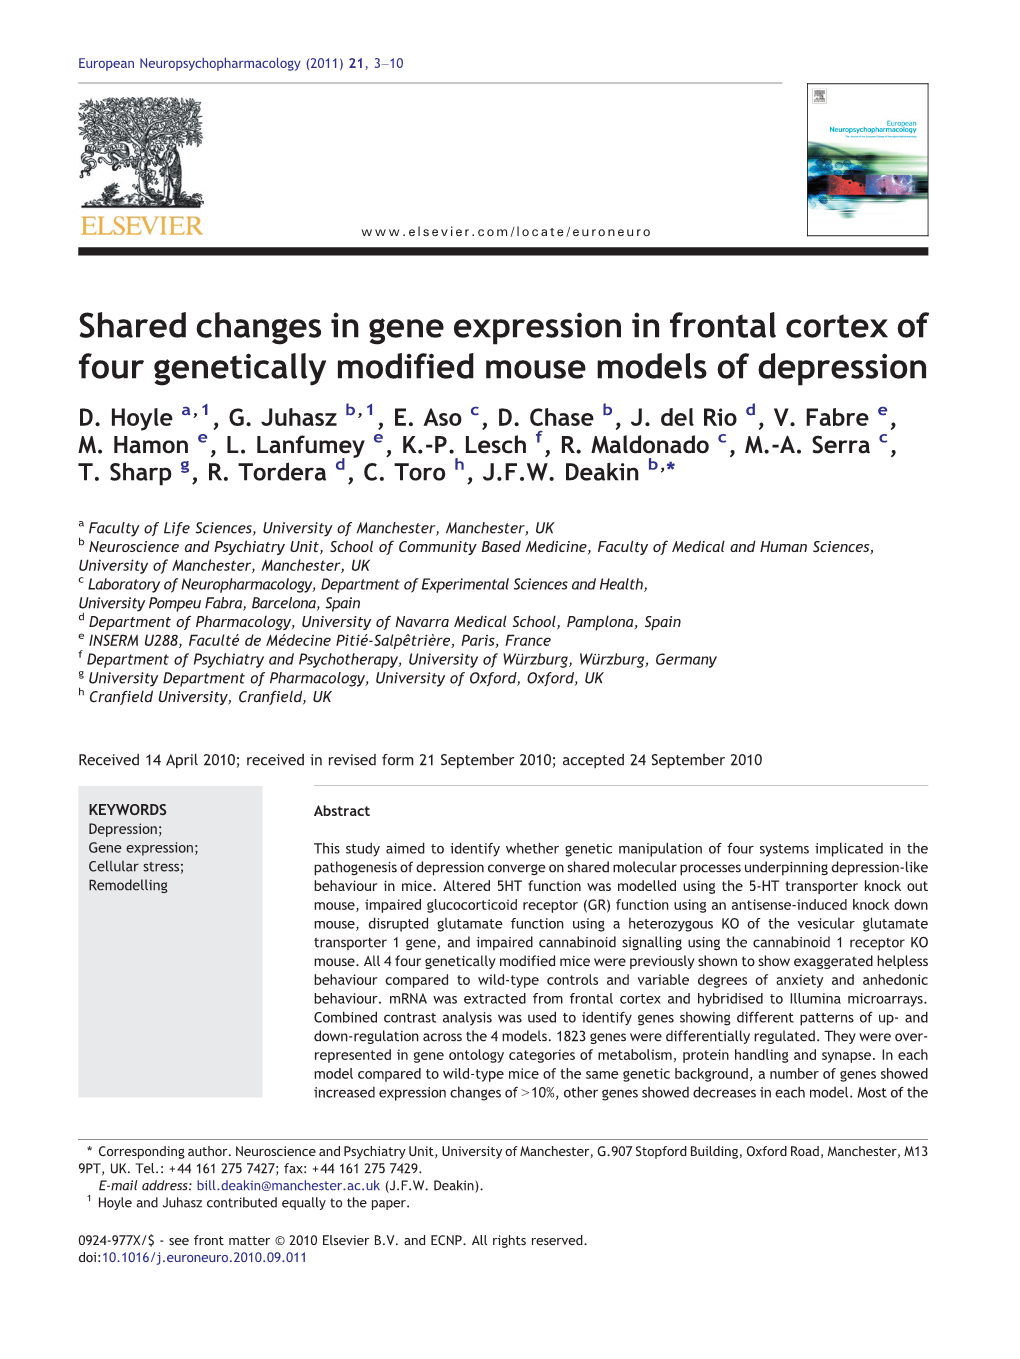 Shared Changes in Gene Expression in Frontal Cortex of Four Genetically Modified Mouse Models of Depression D